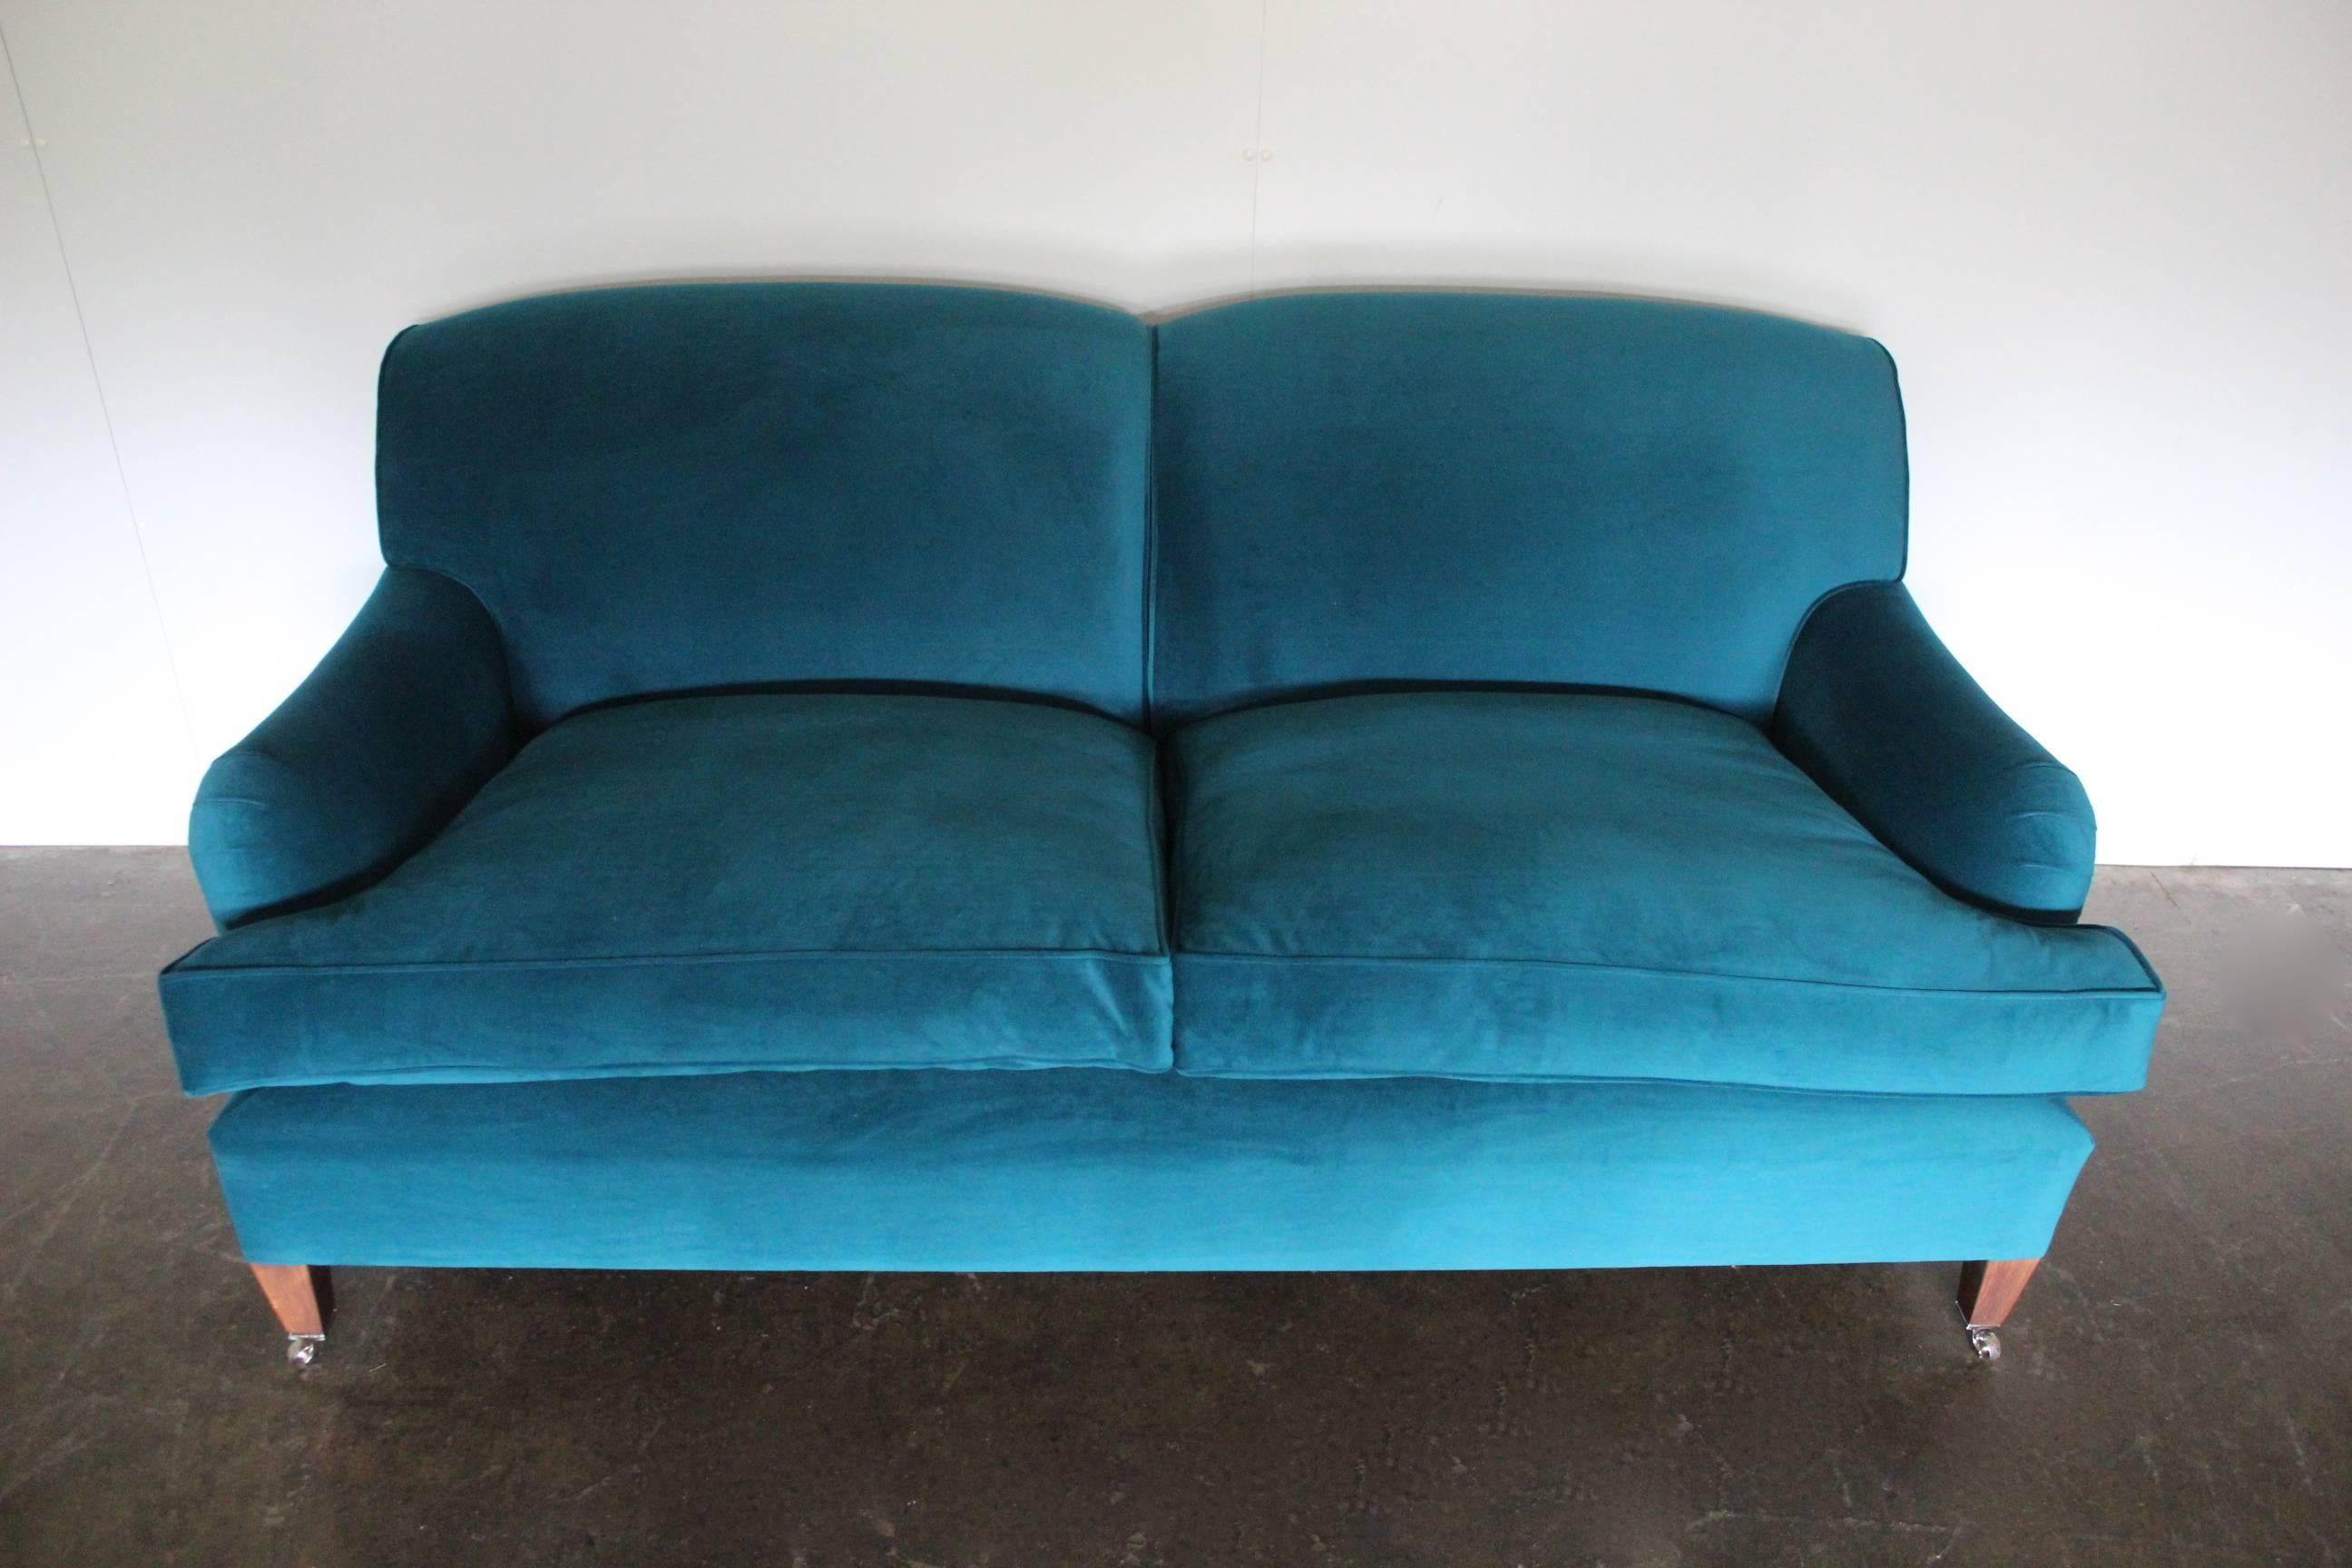 Hand-Crafted George Smith Signature “Standard-Arm” Sofa in Teal Green Blue Velvet